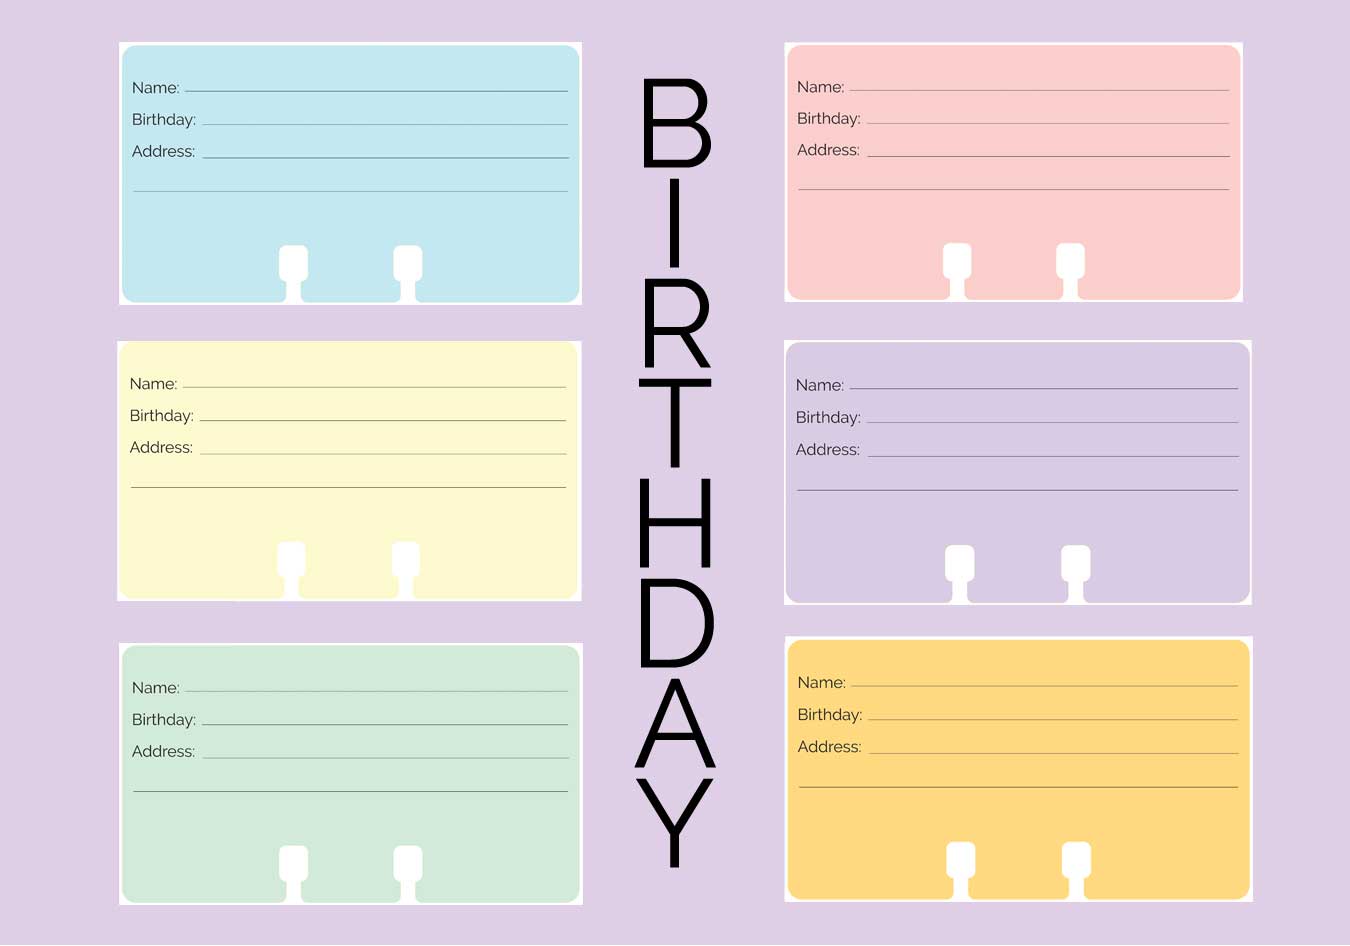 6 colorful Rolodex cards in blue, pink, yellow, purple, green and orange. They have lines and spaces for Name, Birthday, and Address. They are custom Birthday Rolodex Cards.